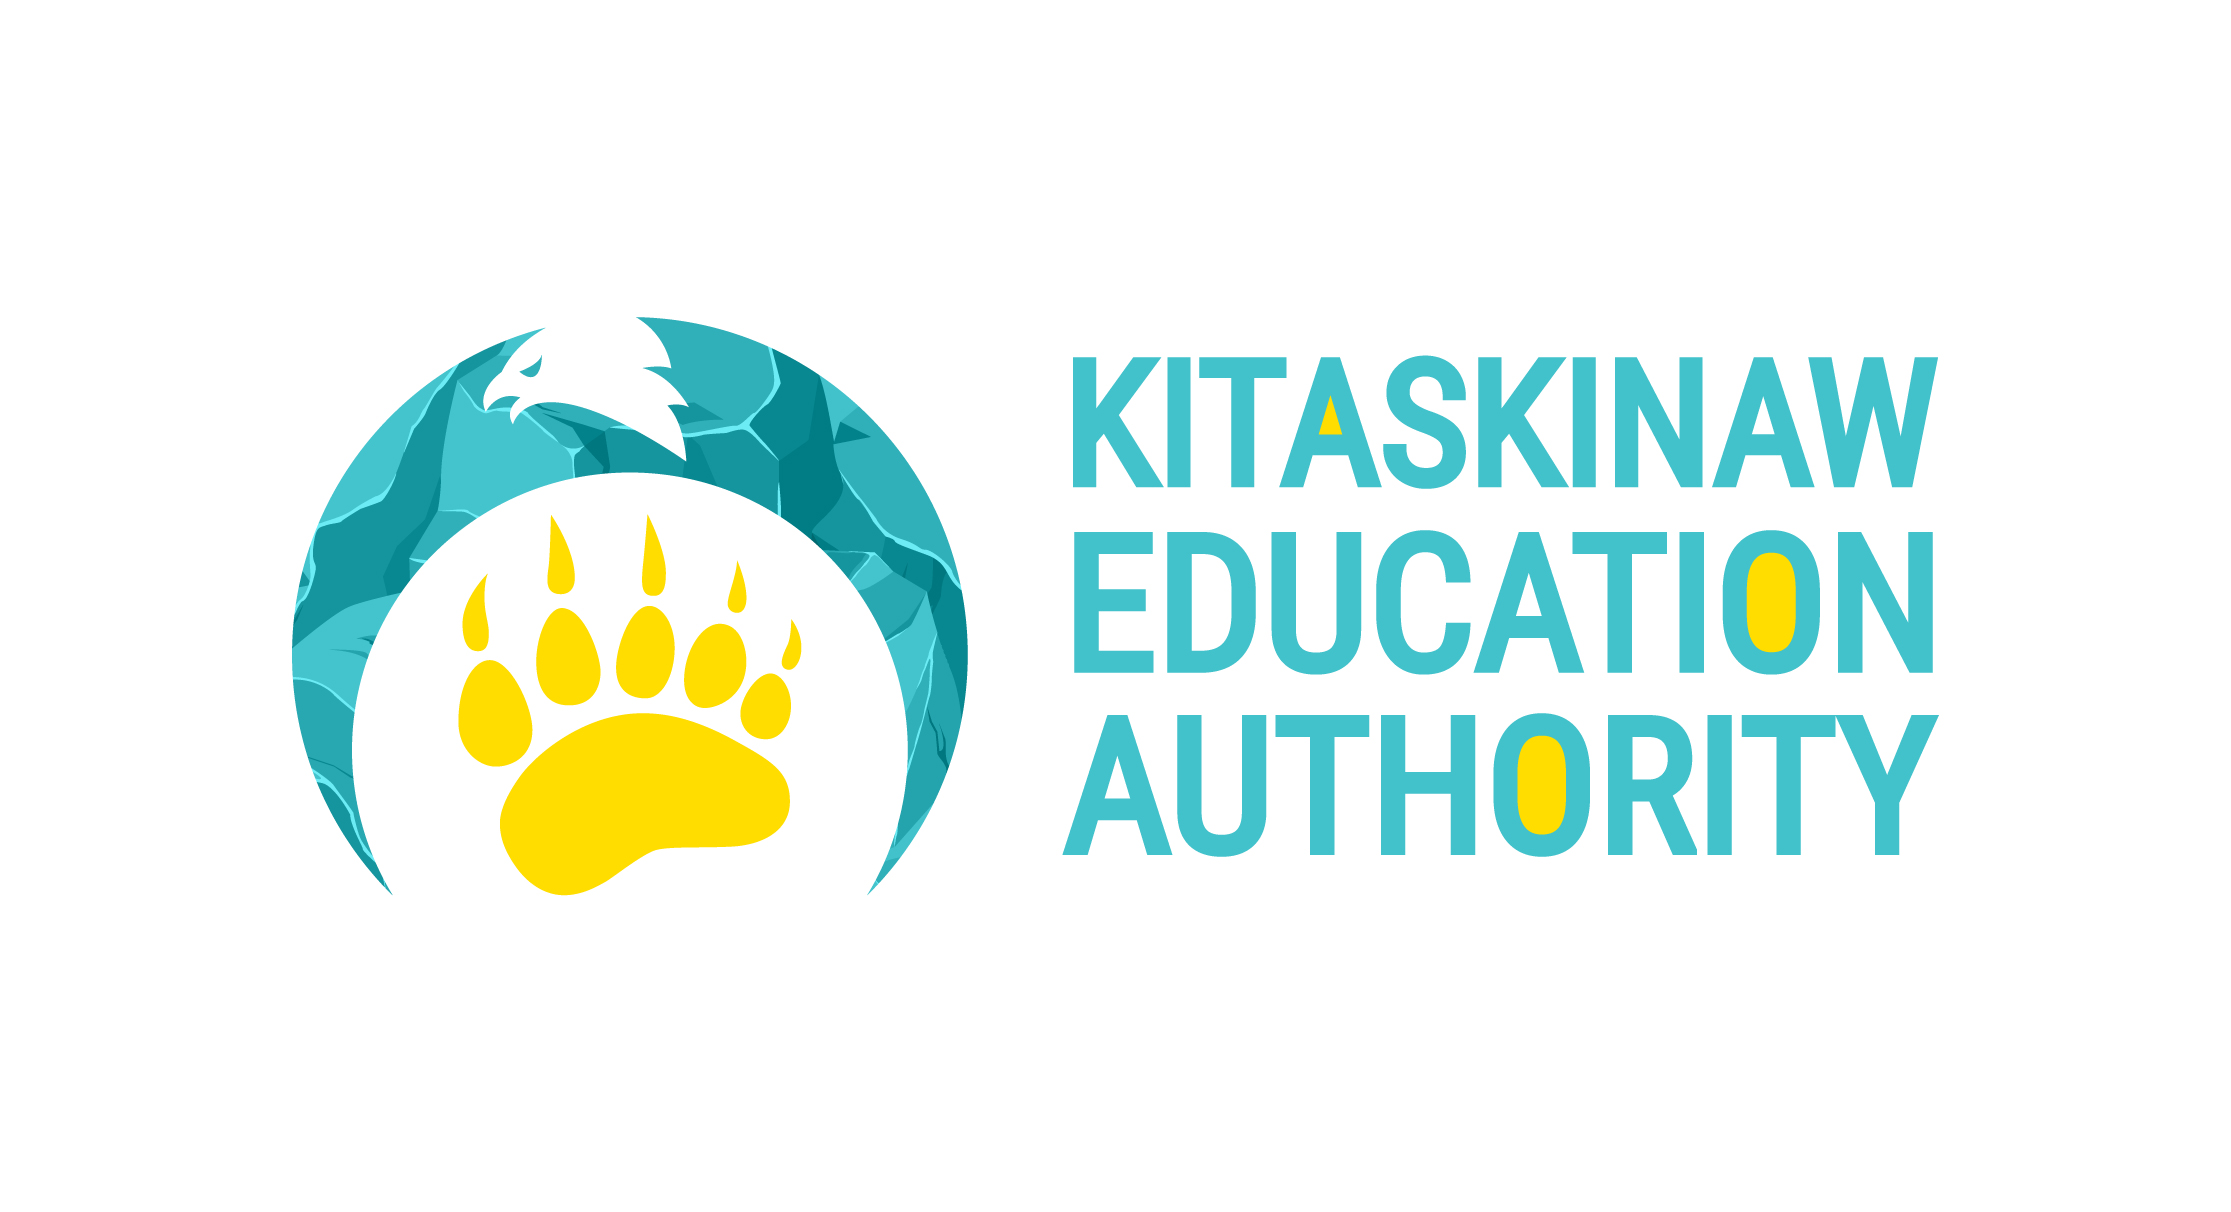 Kitaskinaw Education Authority logo. A blue eagle's wings encompass a yellow paw print from a bear. The words Kitaskinaw Education Authority are written in light blue text to the right of the image.